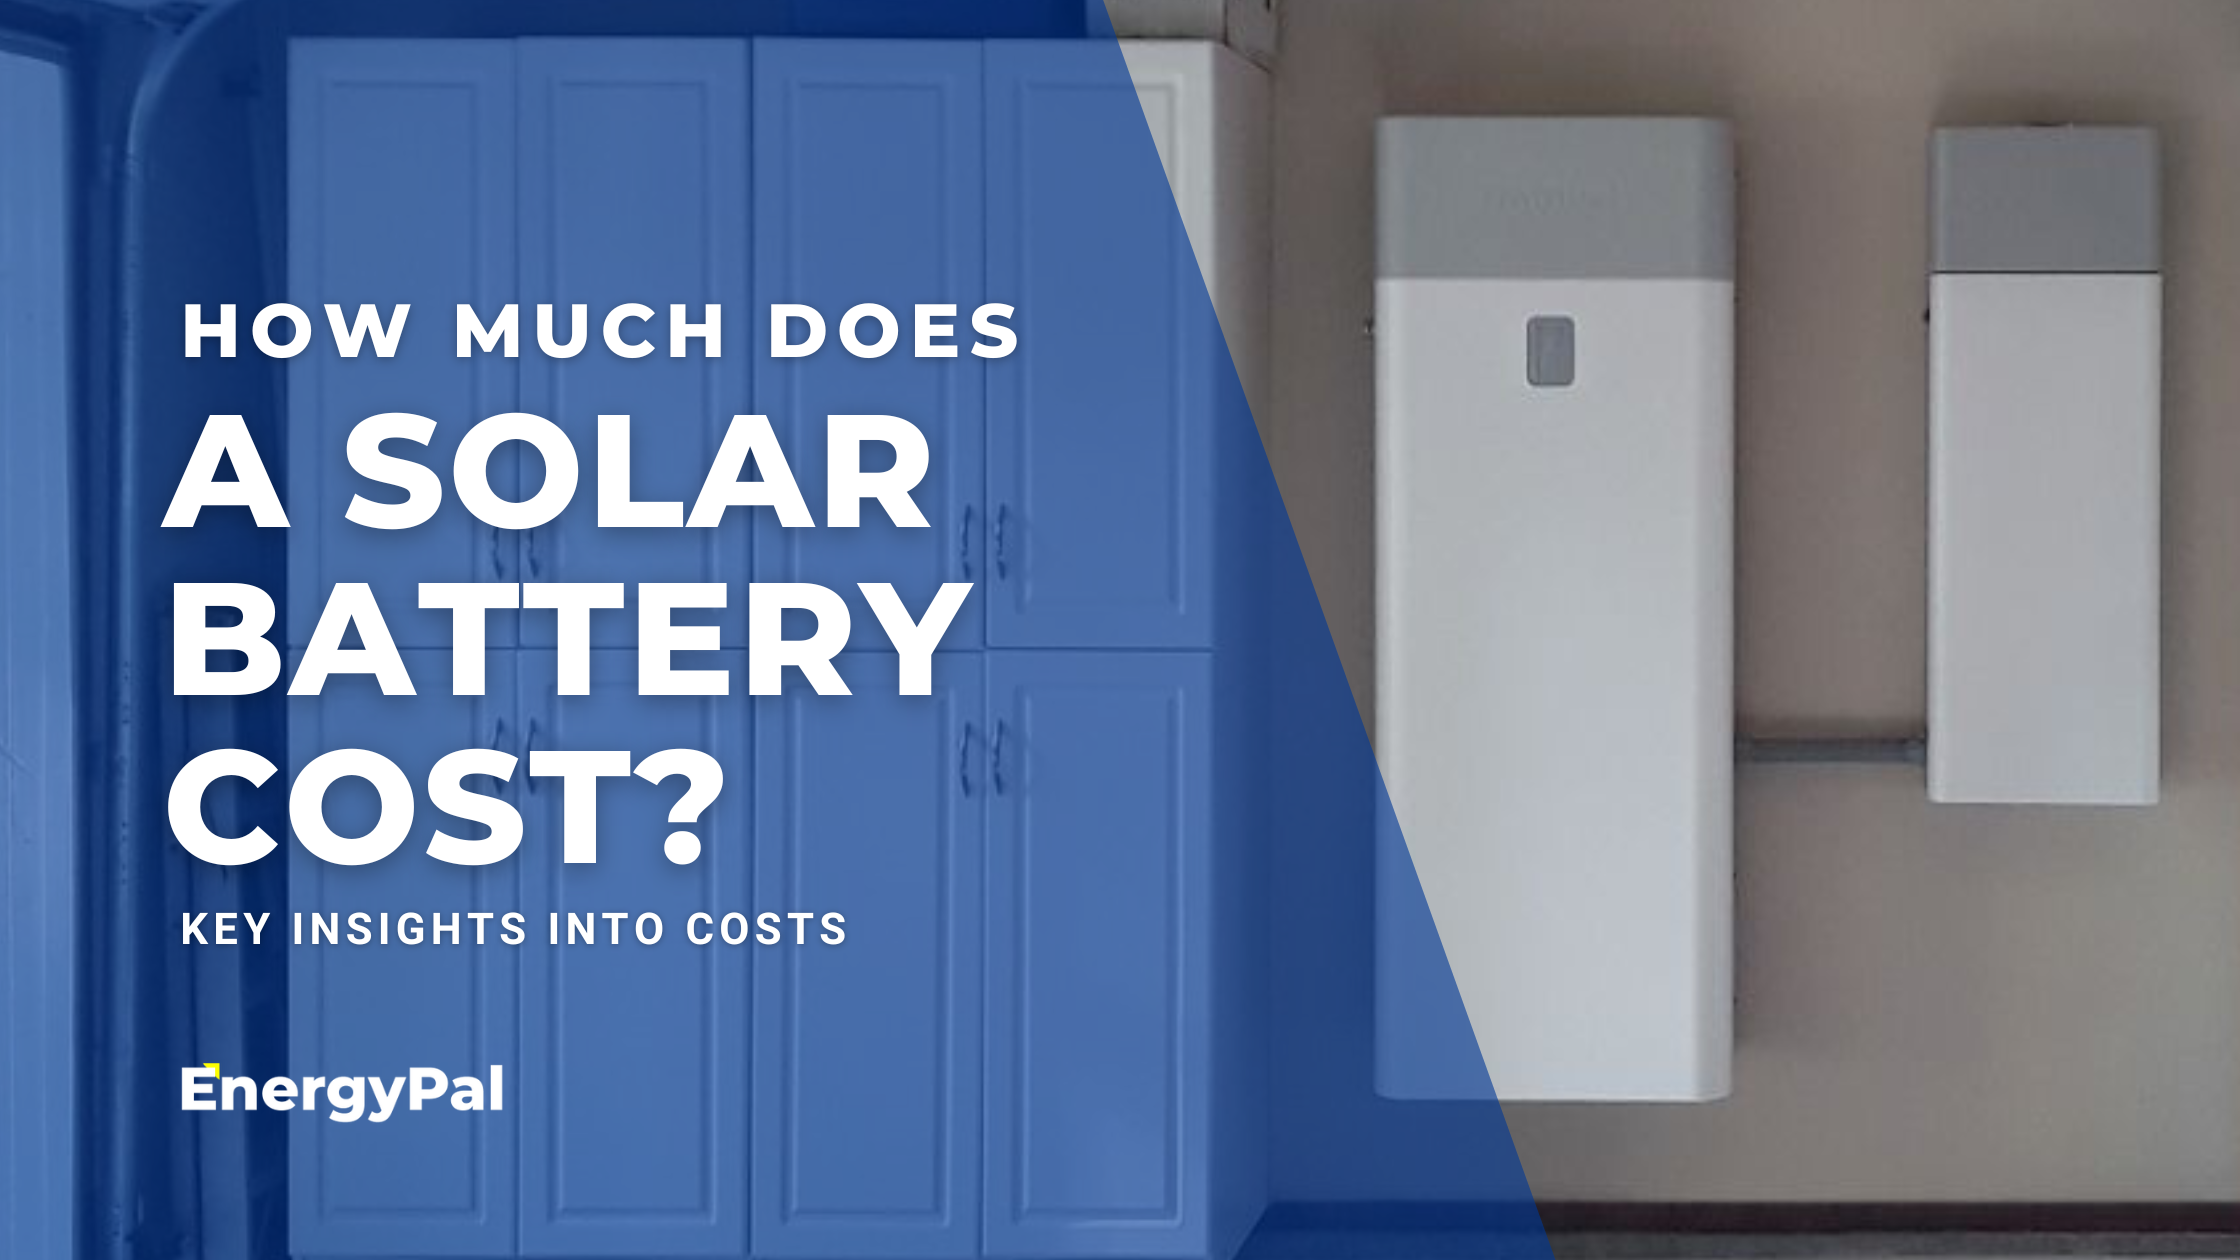 How Much Does A Solar Battery Cost?